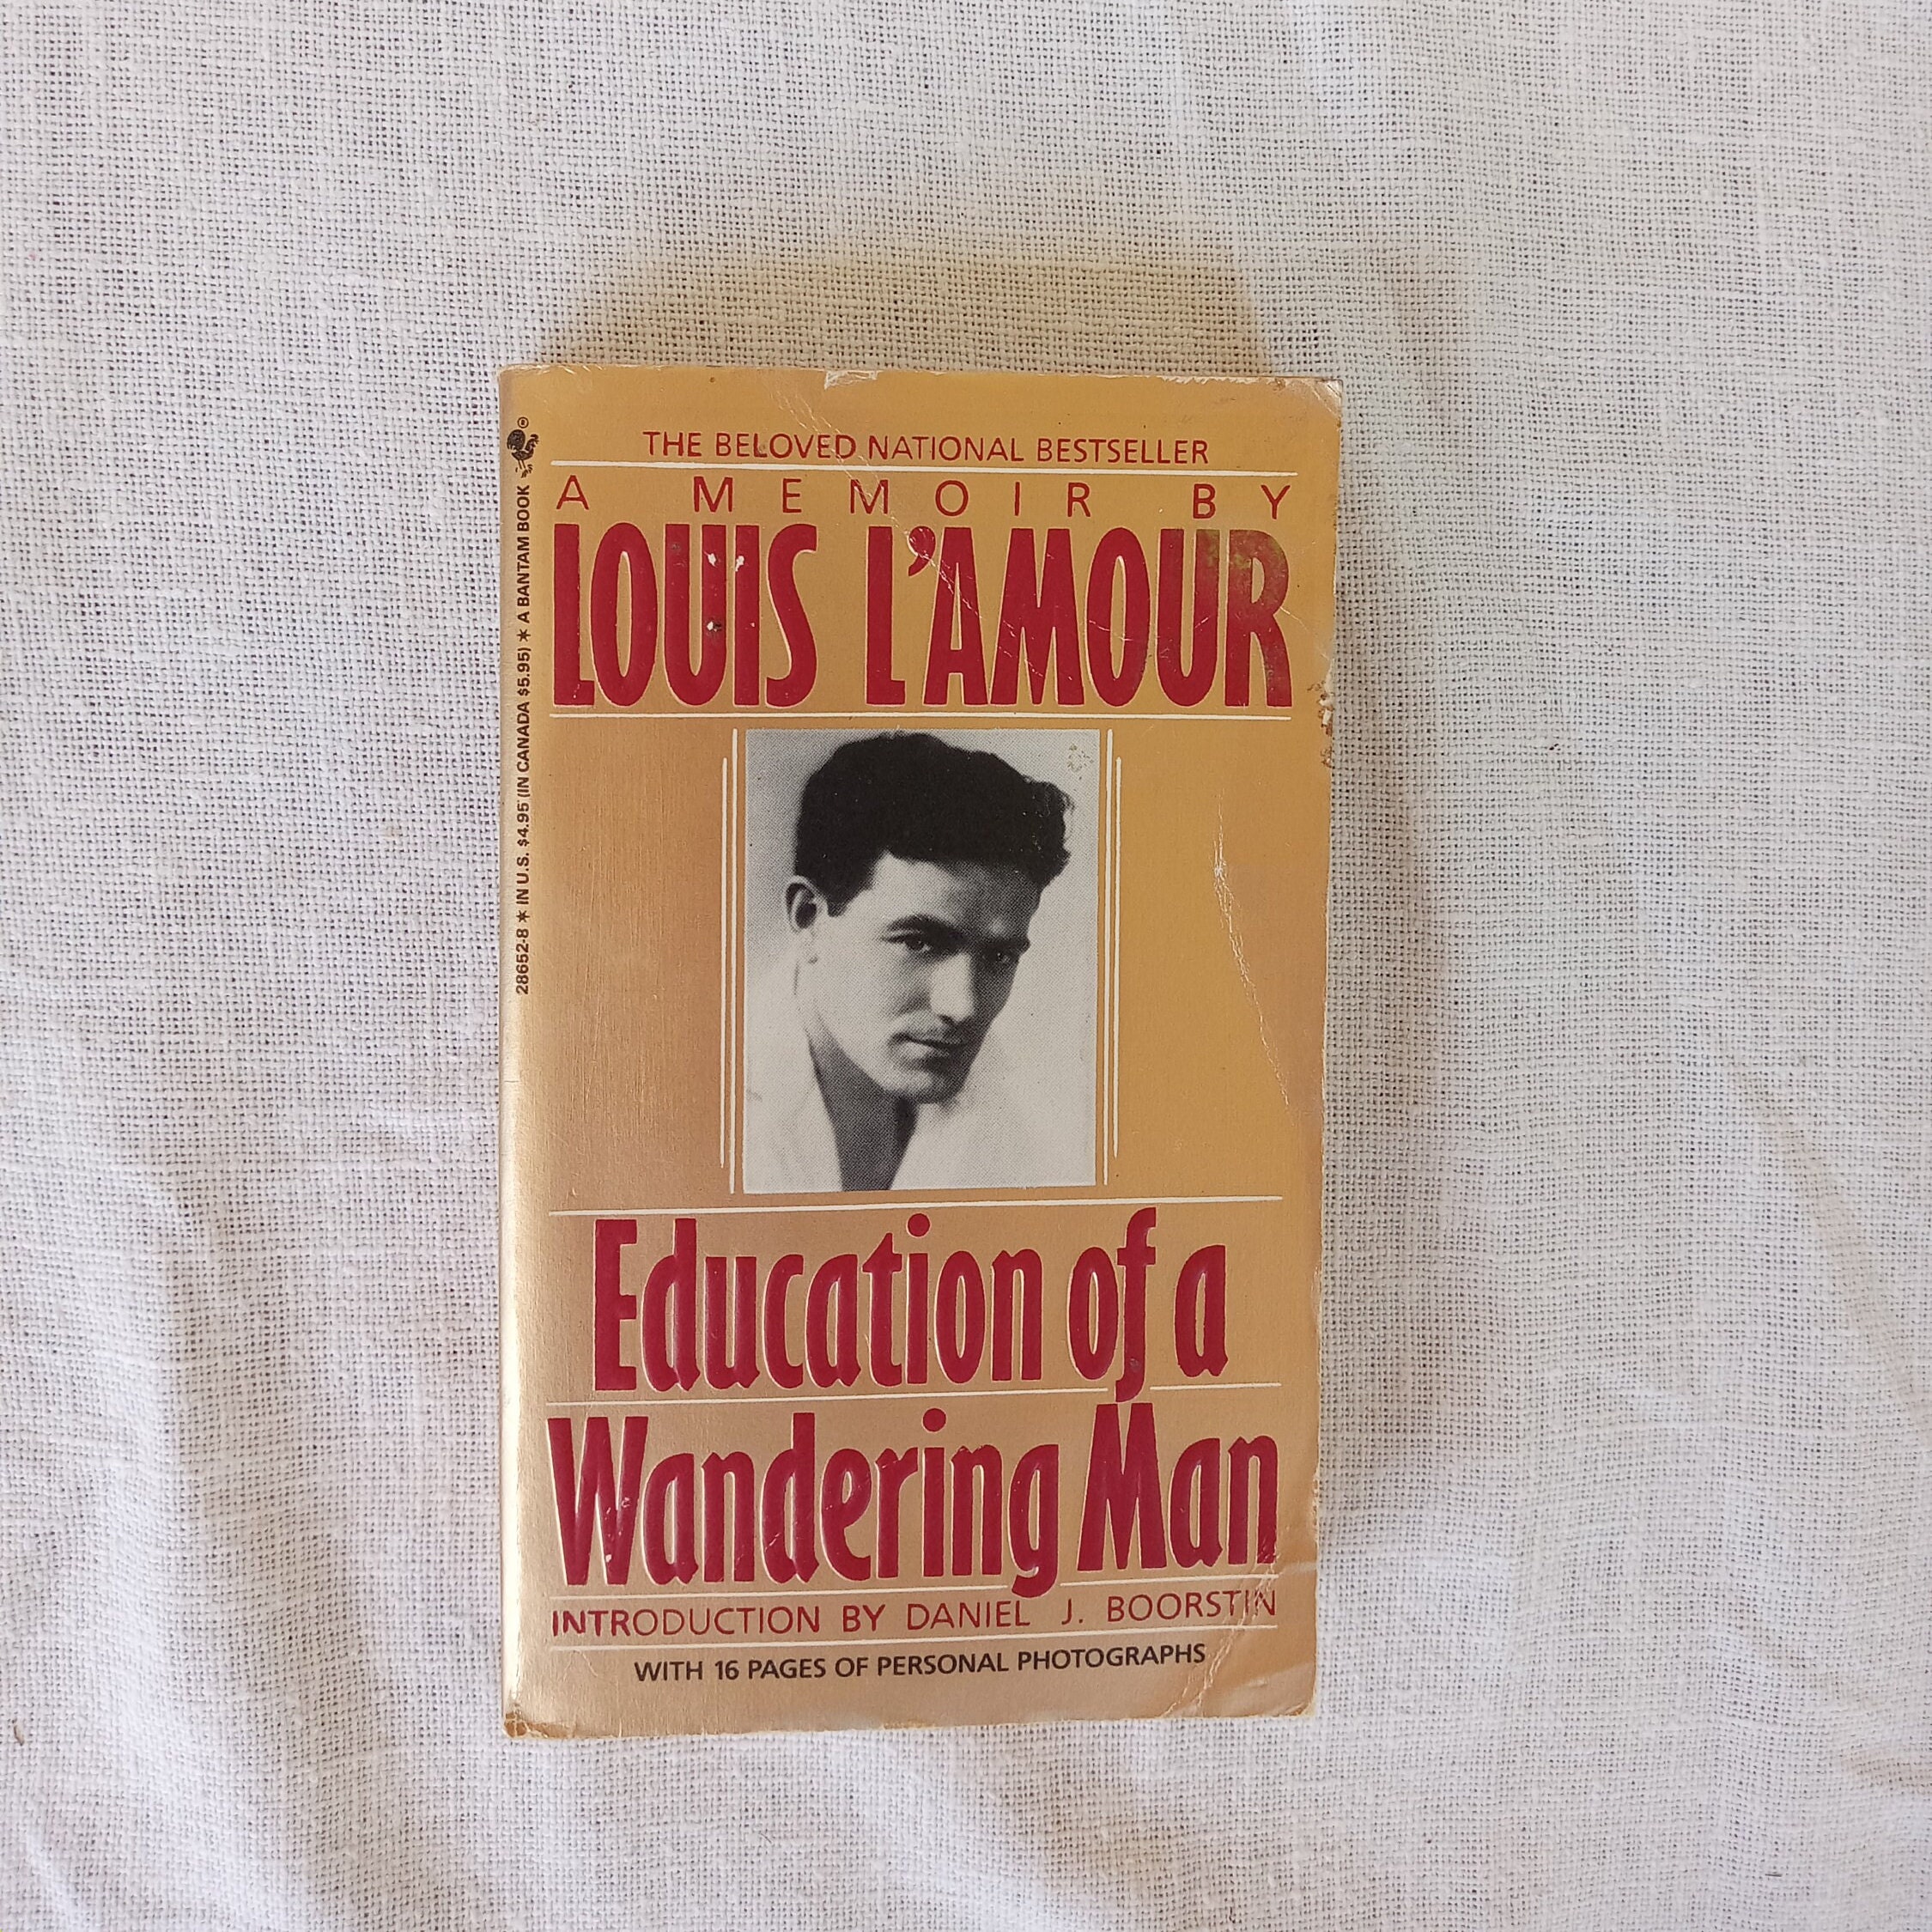 Louis L'amour Collection Set of 15 Volumes Leatherette Hardcovers; Where  The Long Grass Blows (x2), Jubal Sackett (x2), Silver Canyon, The Warrior's  Path, Sackett (x2), Reilly's Luck, Sackett's Land, The Sackett Companion